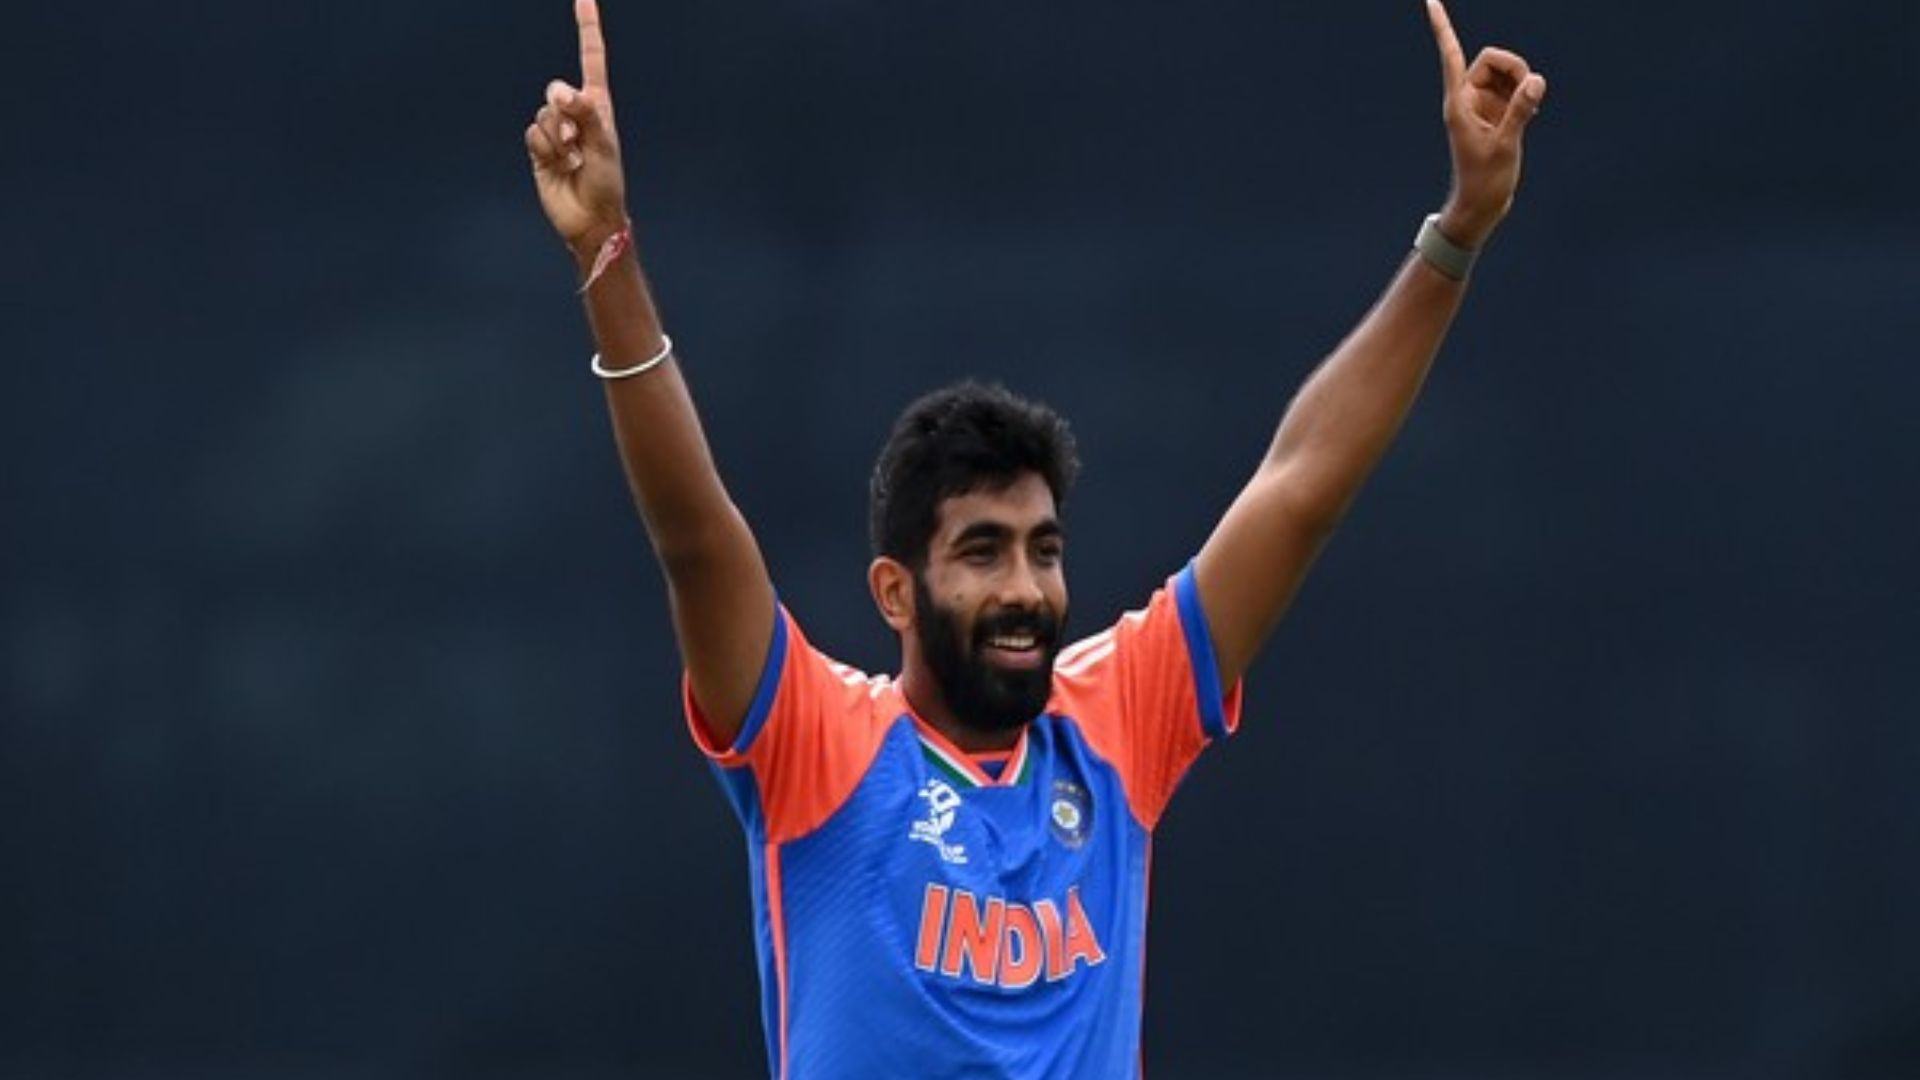 T20 WC: Arshdeep Praises Bumrah For Bowling “Like a Video Game” Against Australia